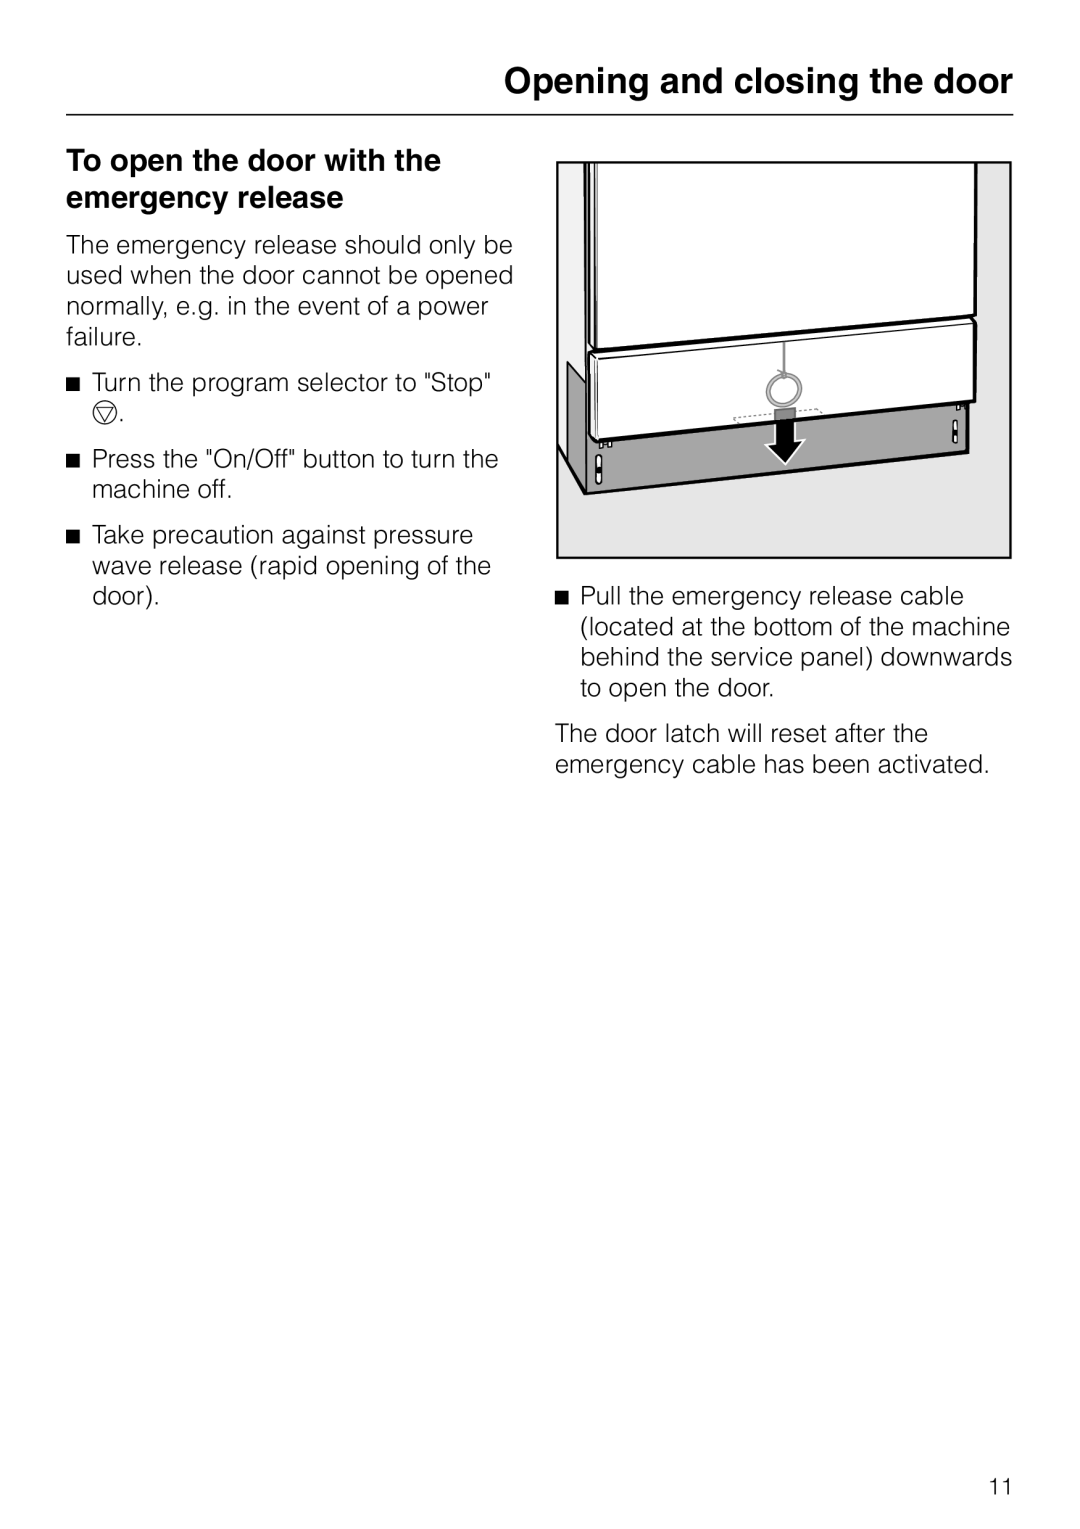 Miele G 7804 manual To open the door with the emergency release, Opening and closing the door 